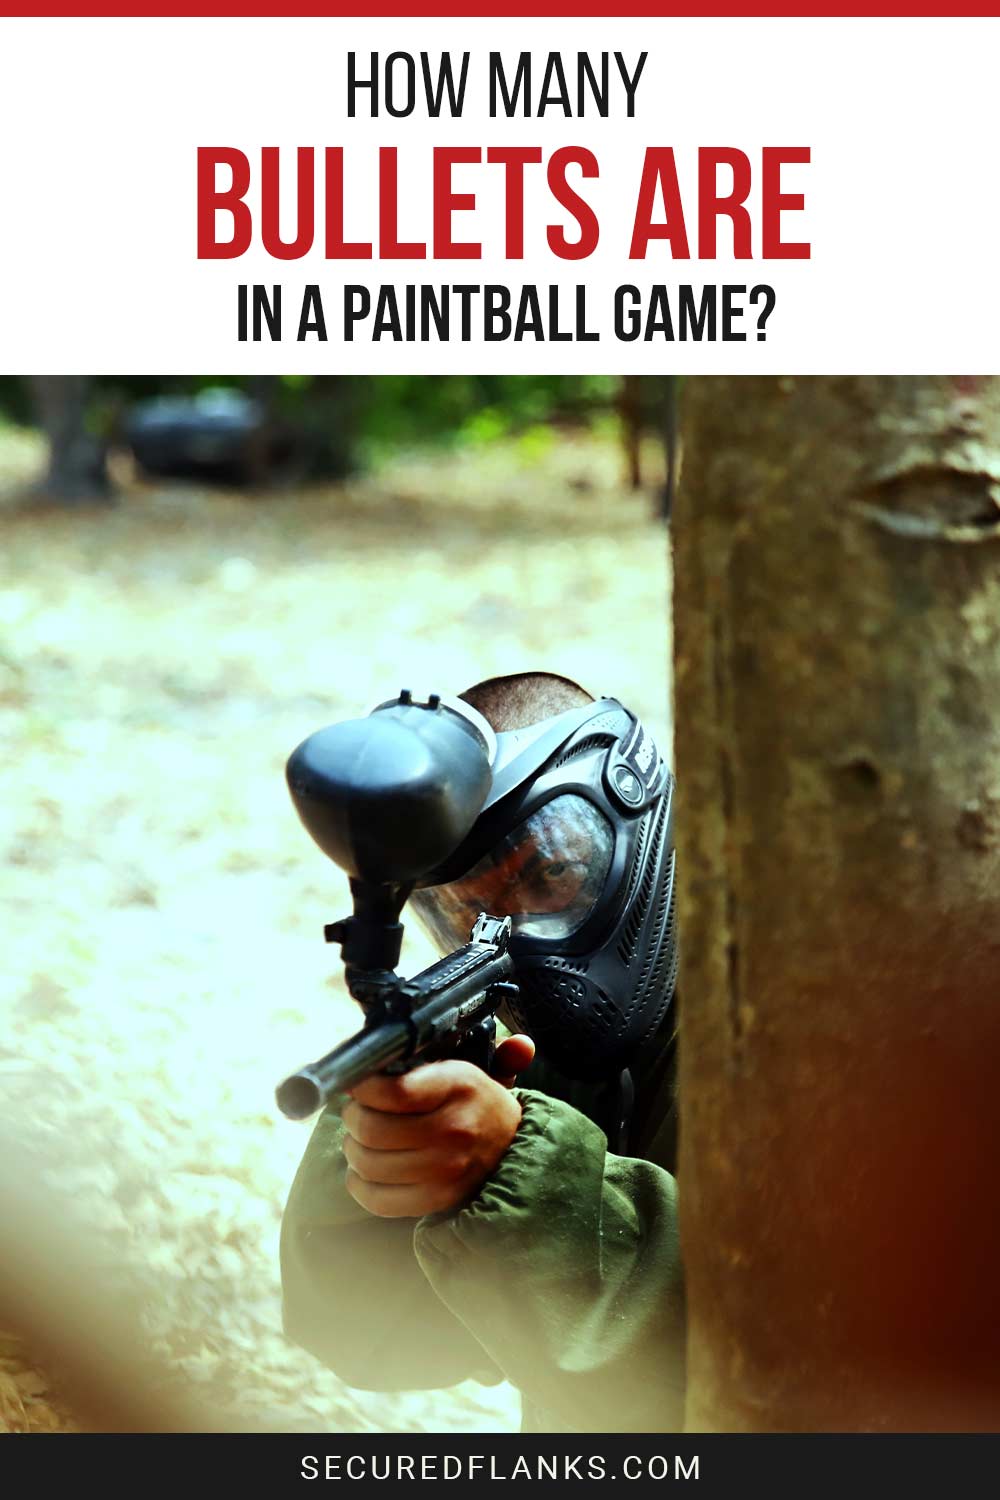 Man peaking with a paintball gun in hand - How Many Bullets Are In A Paintball Game?